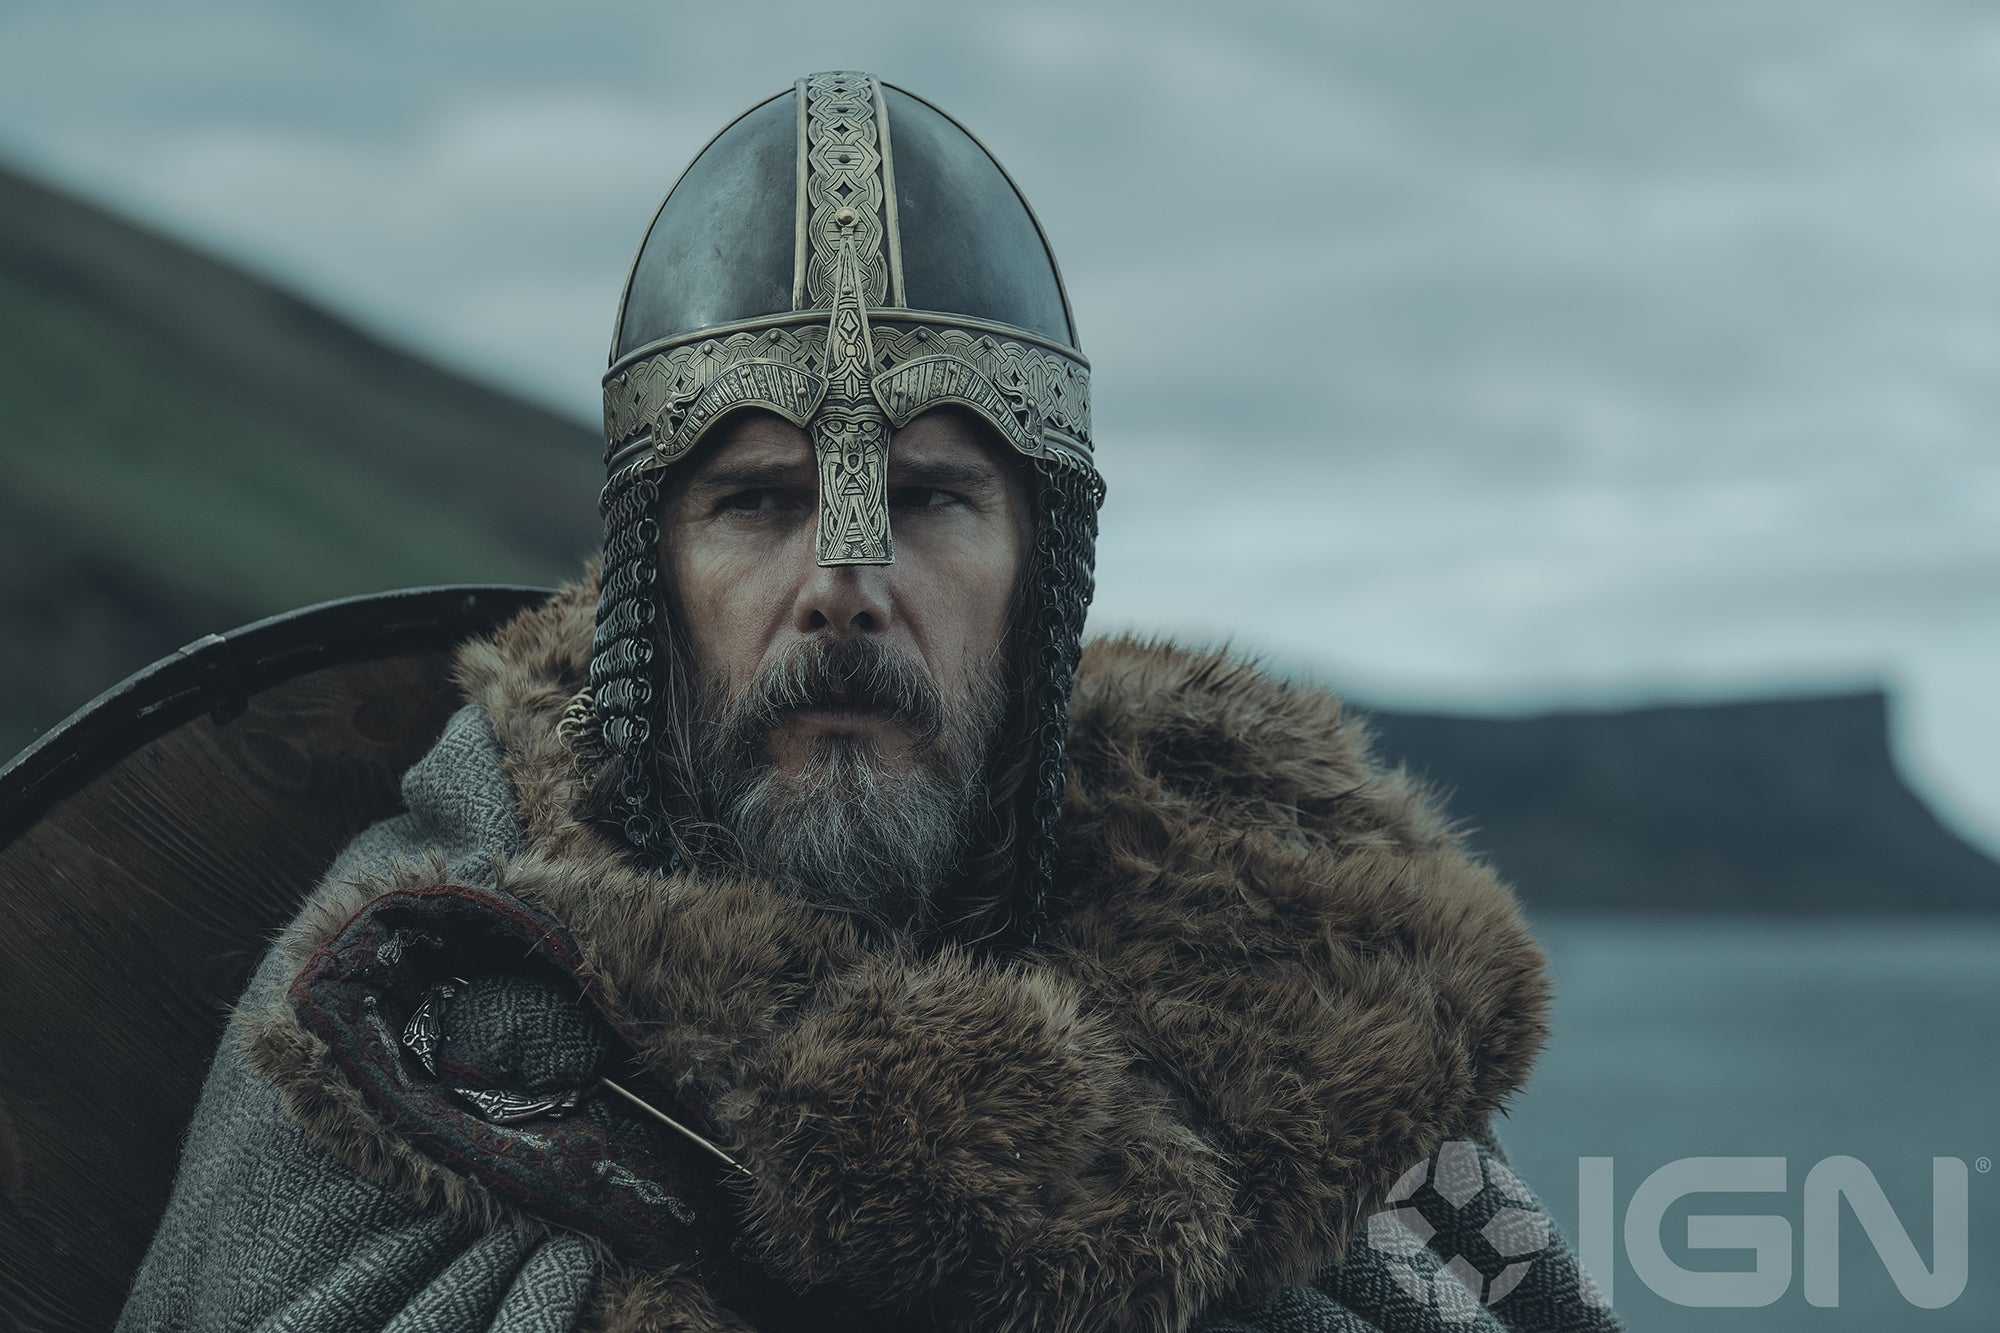 The Northman: Check Out Four Exclusive Image From the Viking Revenge Film